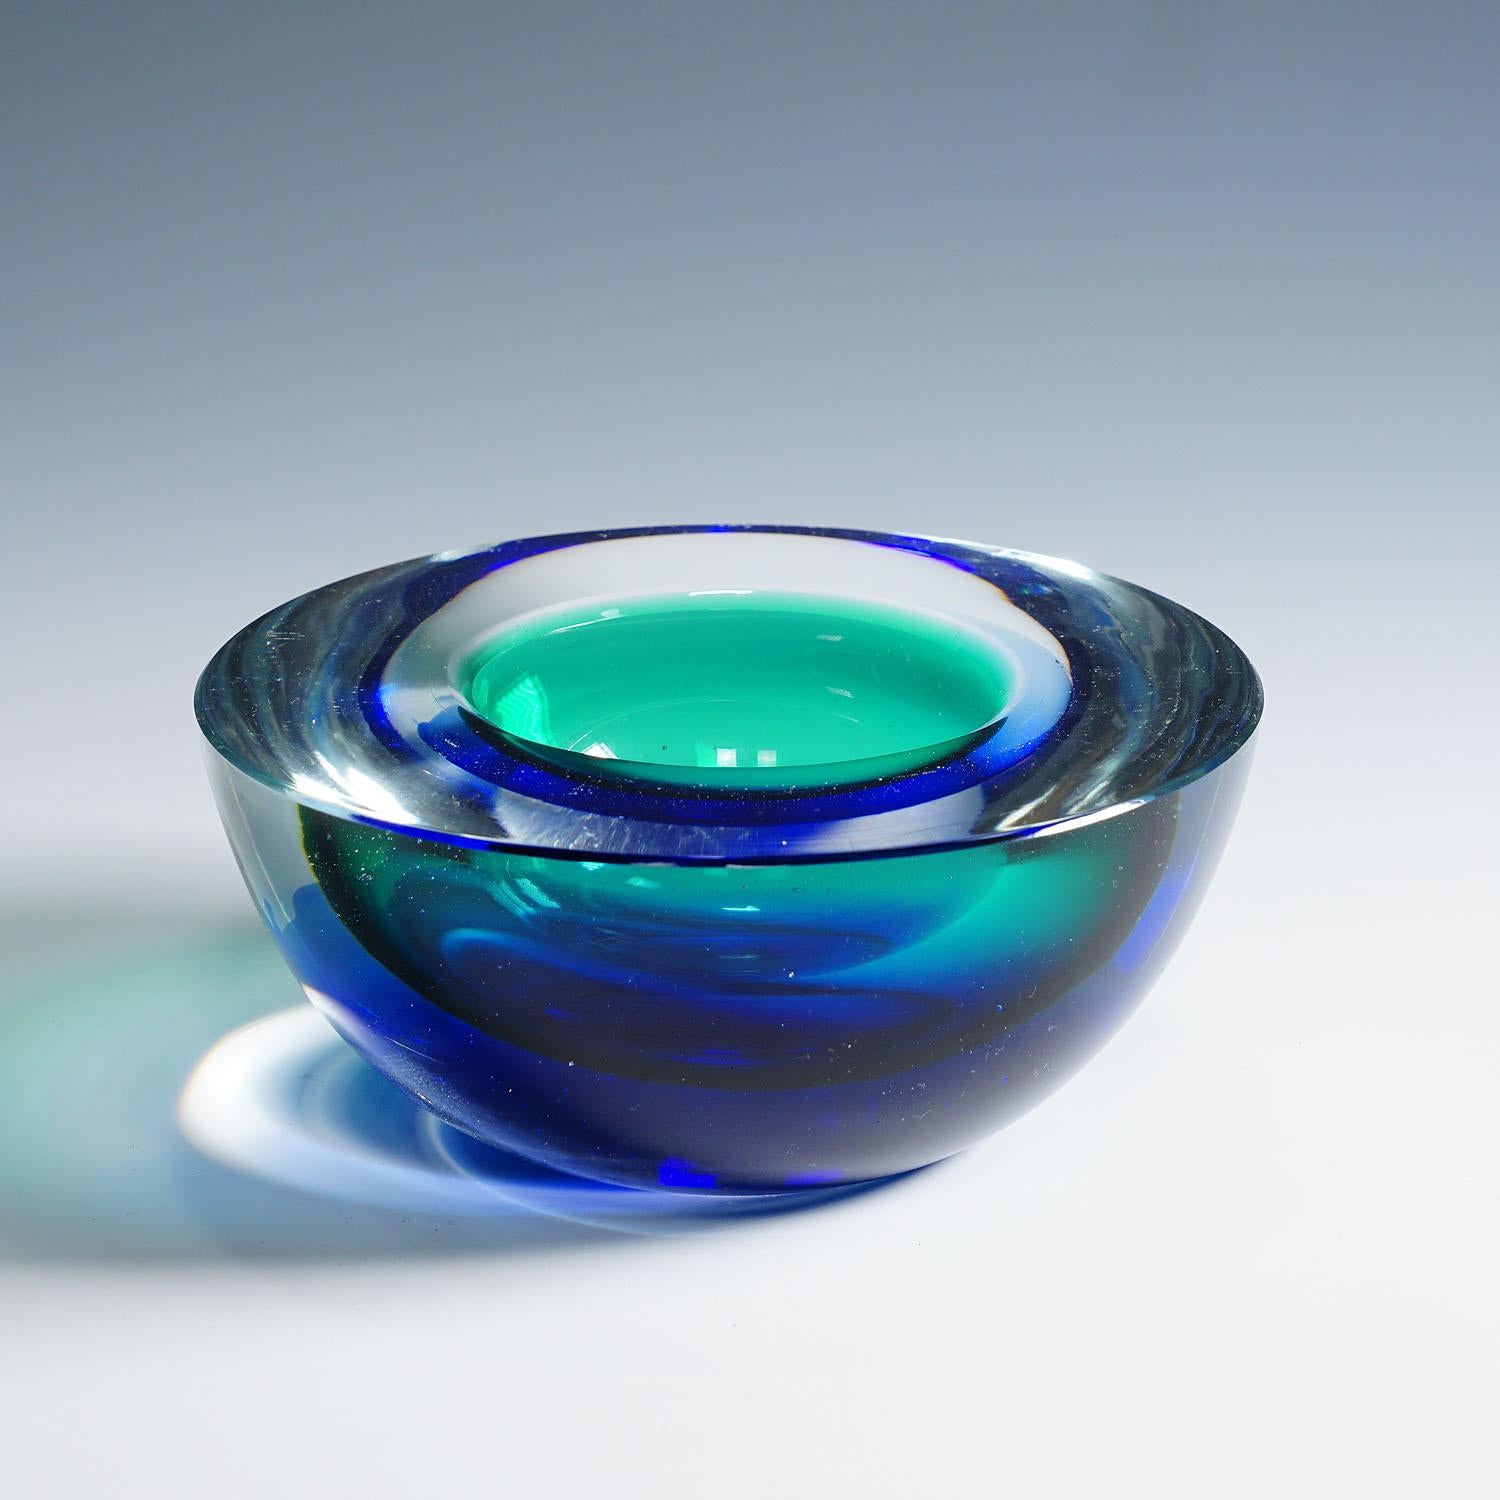 Mid-Century Modern Archimede Seguso Geode Bowl in Blue and Green, Murano Italy ca. 1960s For Sale